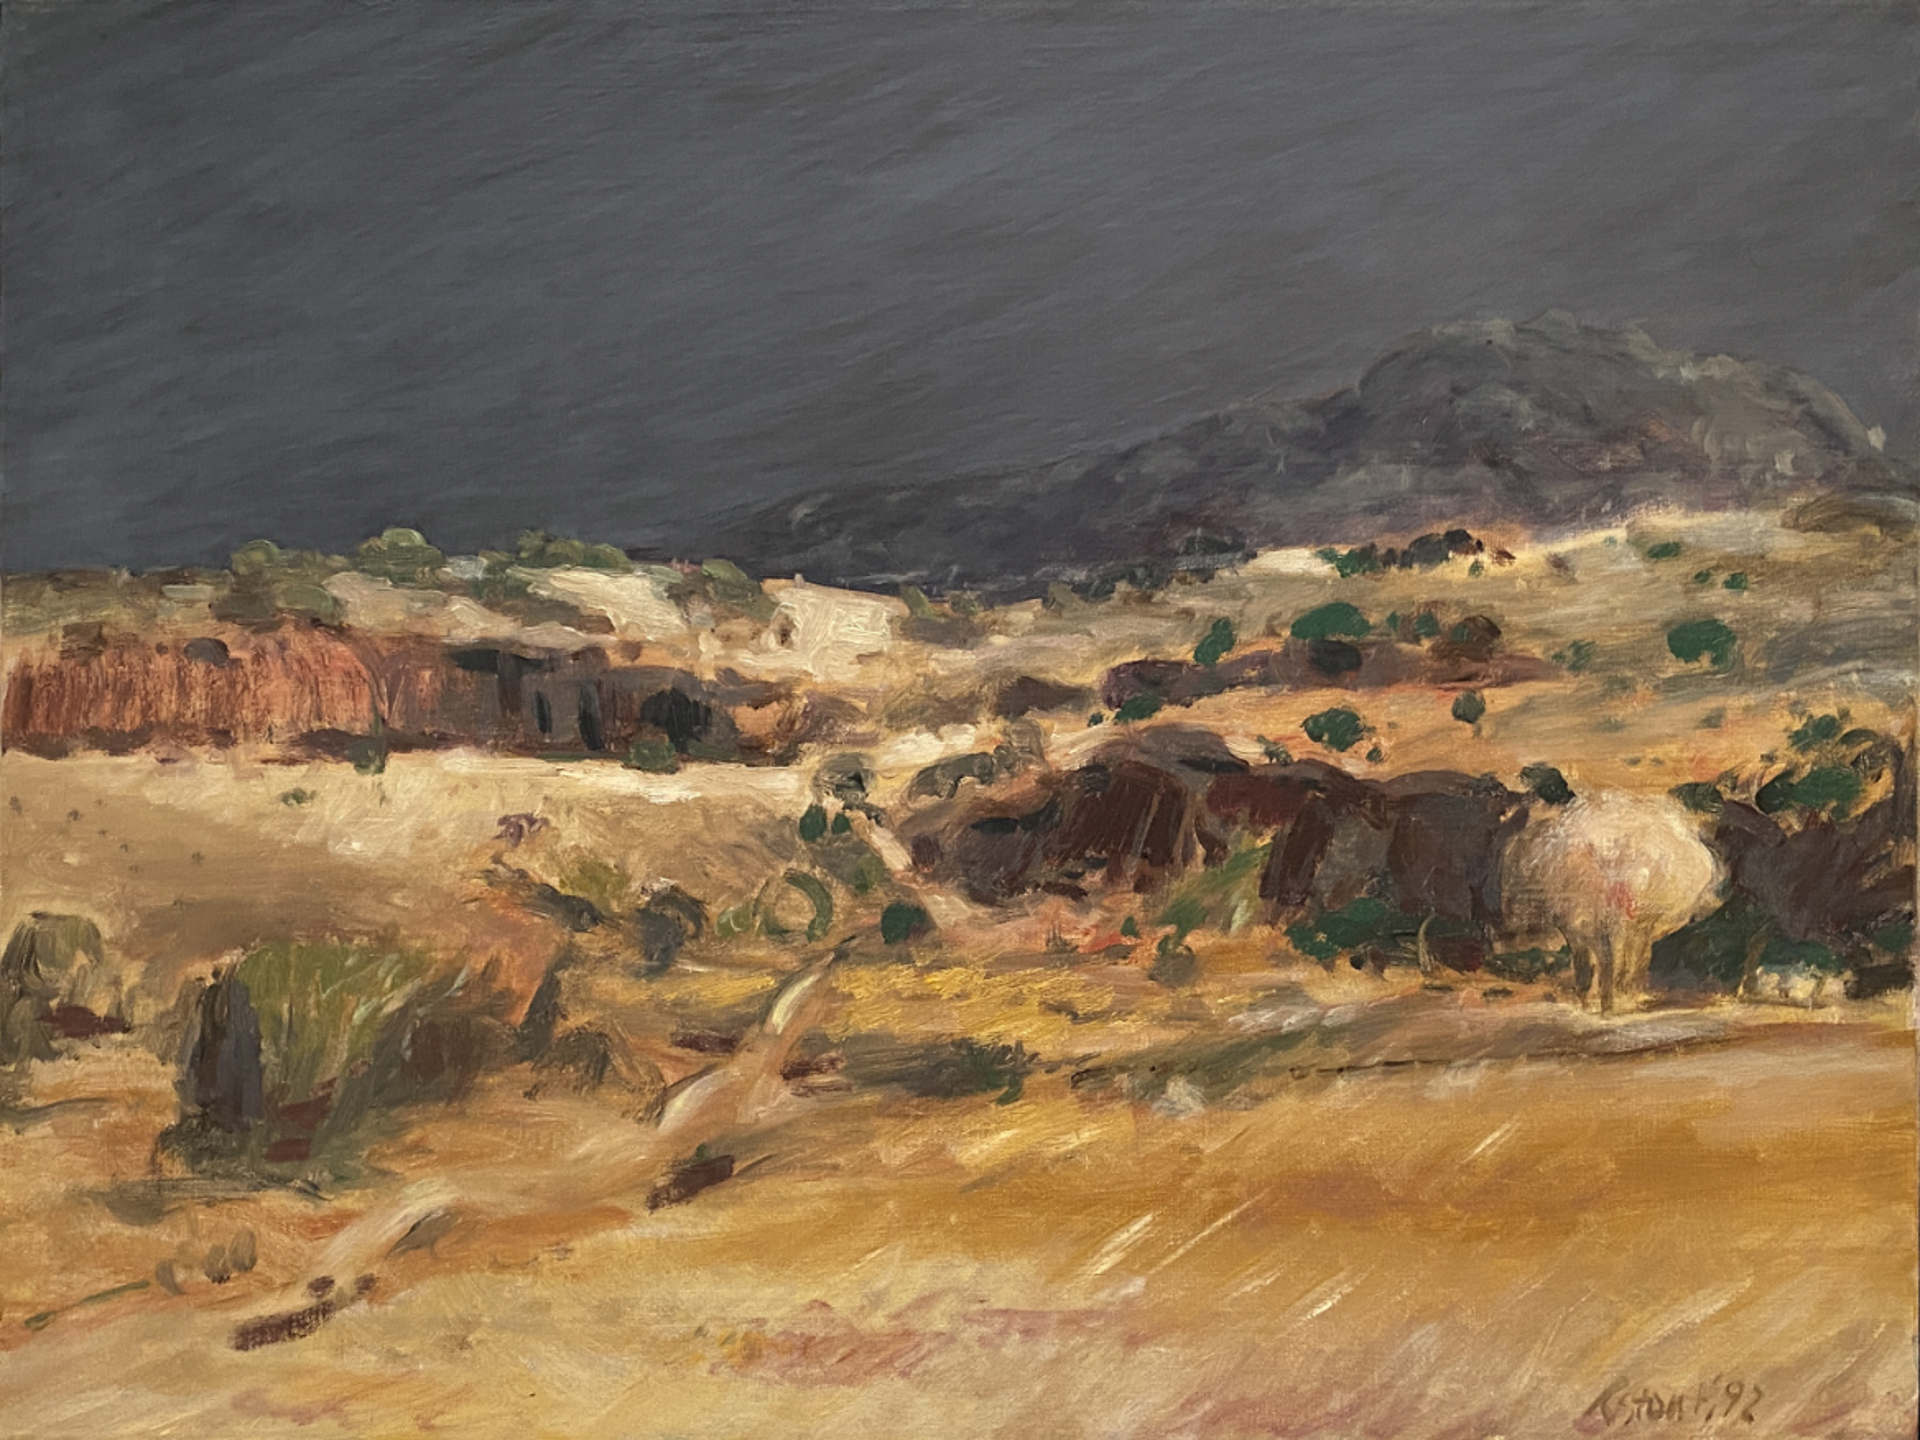 Untitled, Big Bend by Richard Stout - Early Works